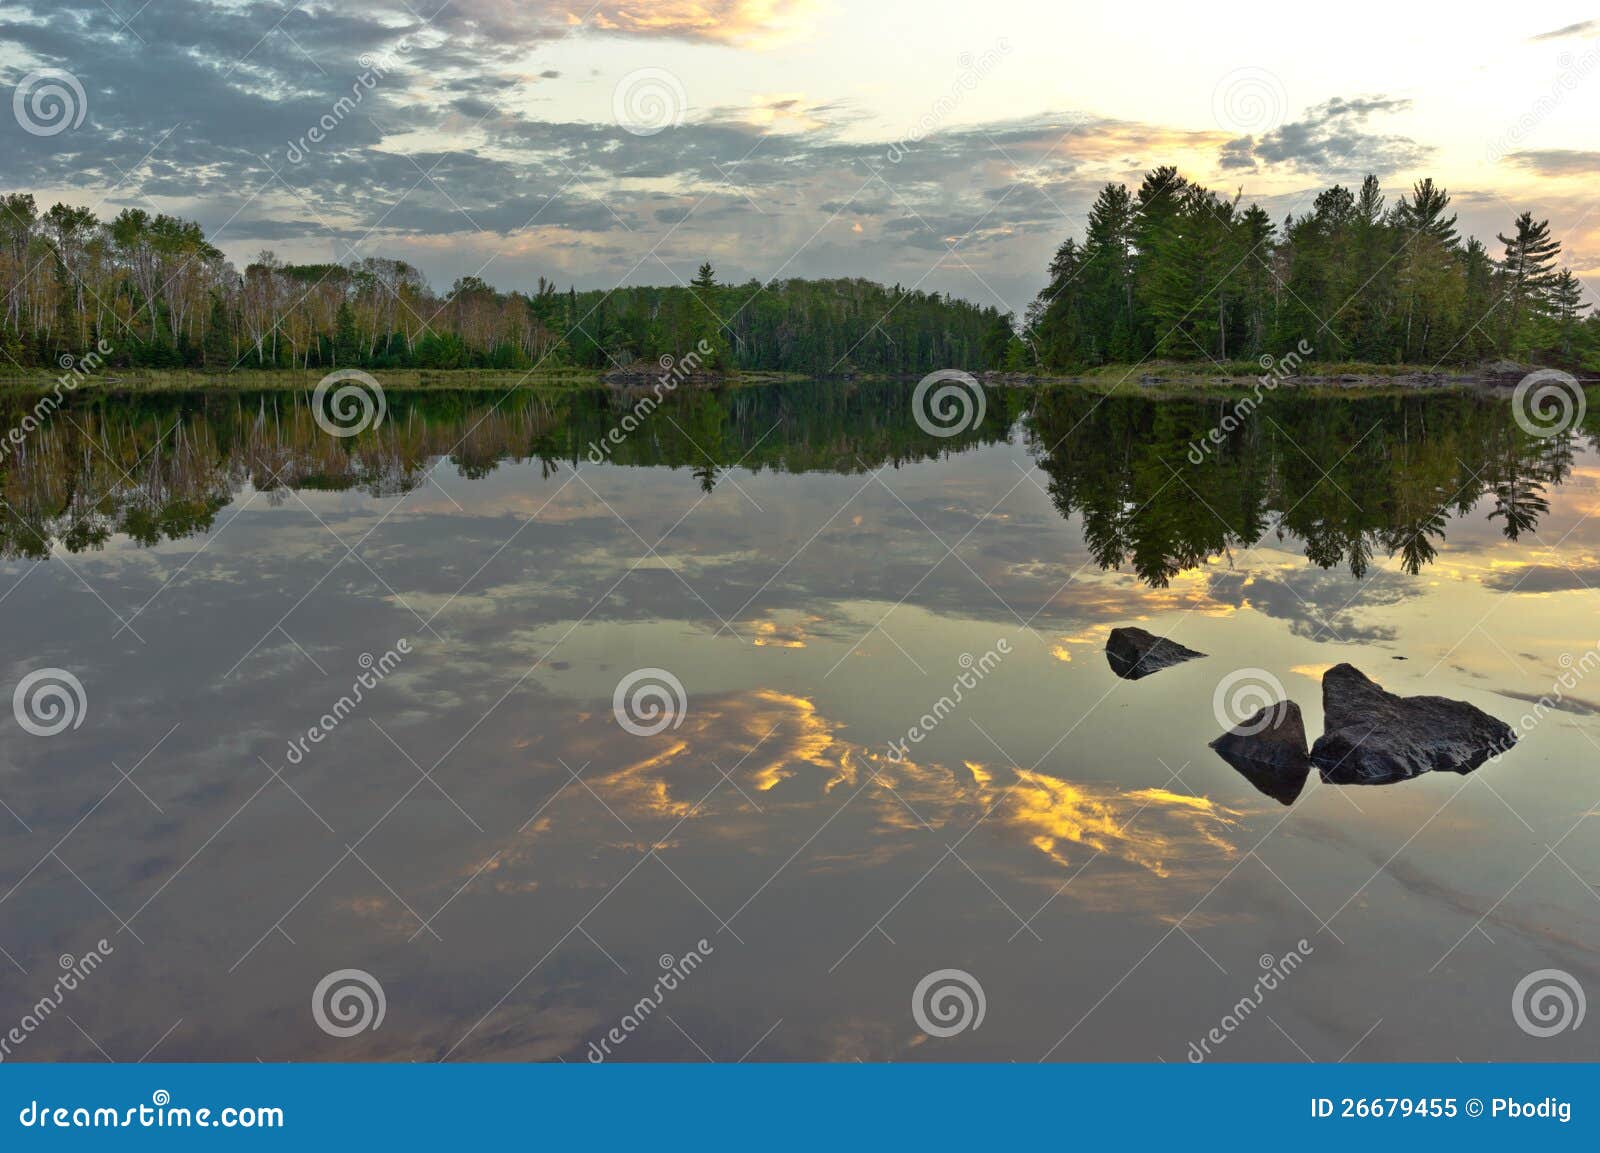 boundary waters reflection.